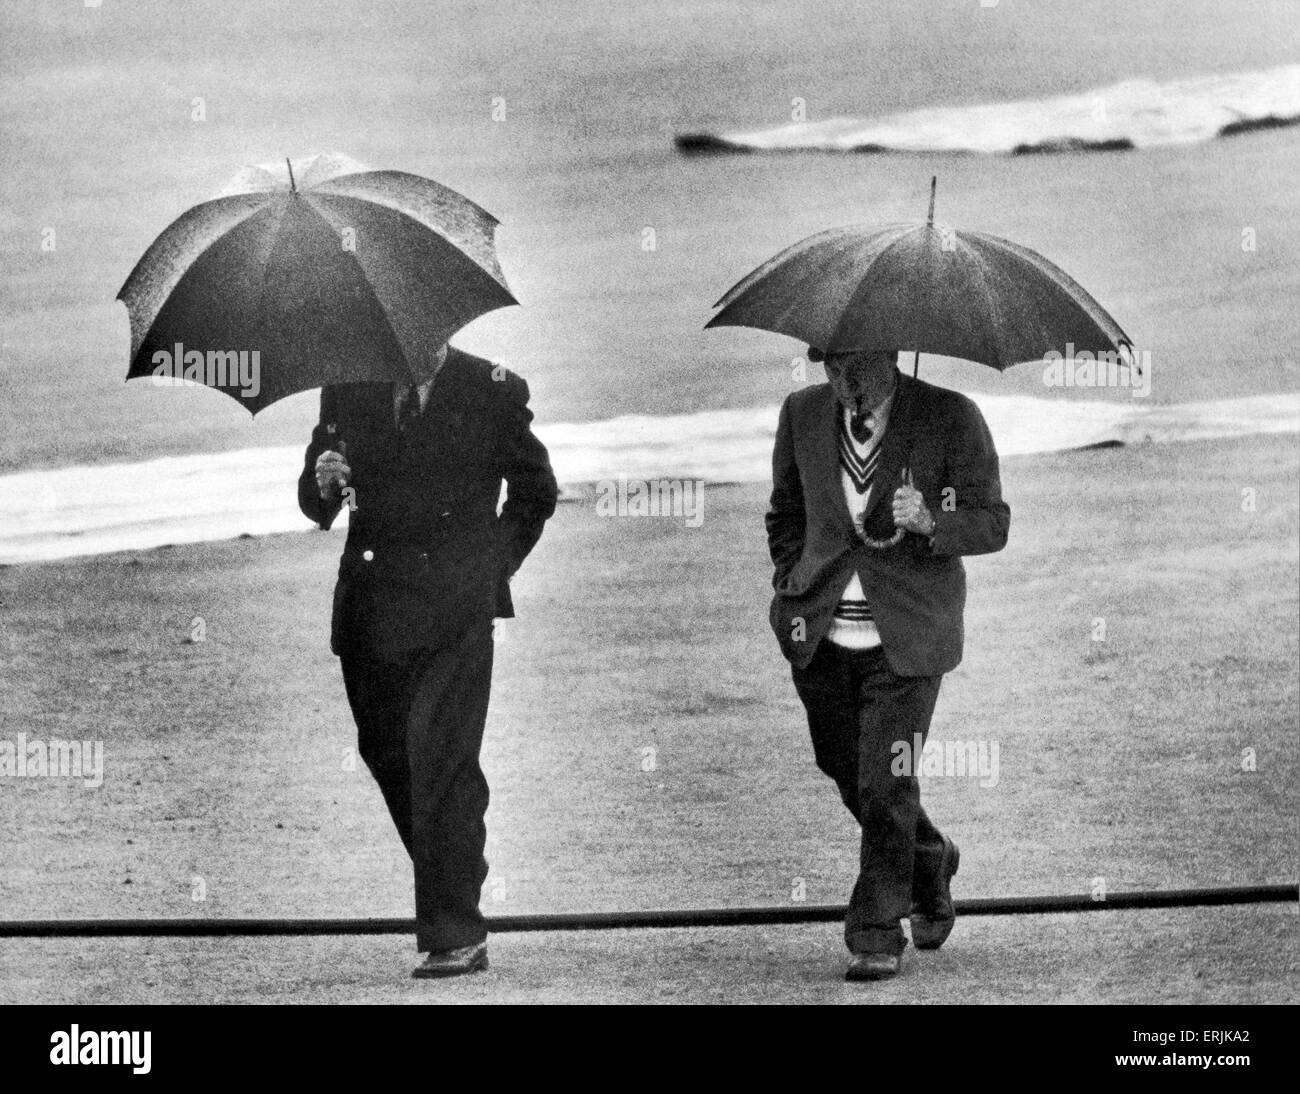 Australian cricket tour of England for the Ashes. England v Australia First Test match at Edgbaston. From underneath the umbrellas of umpires Sid Buller (left) and Frank Lee, the decision of no more play today is made. 12th June 1961. Stock Photo